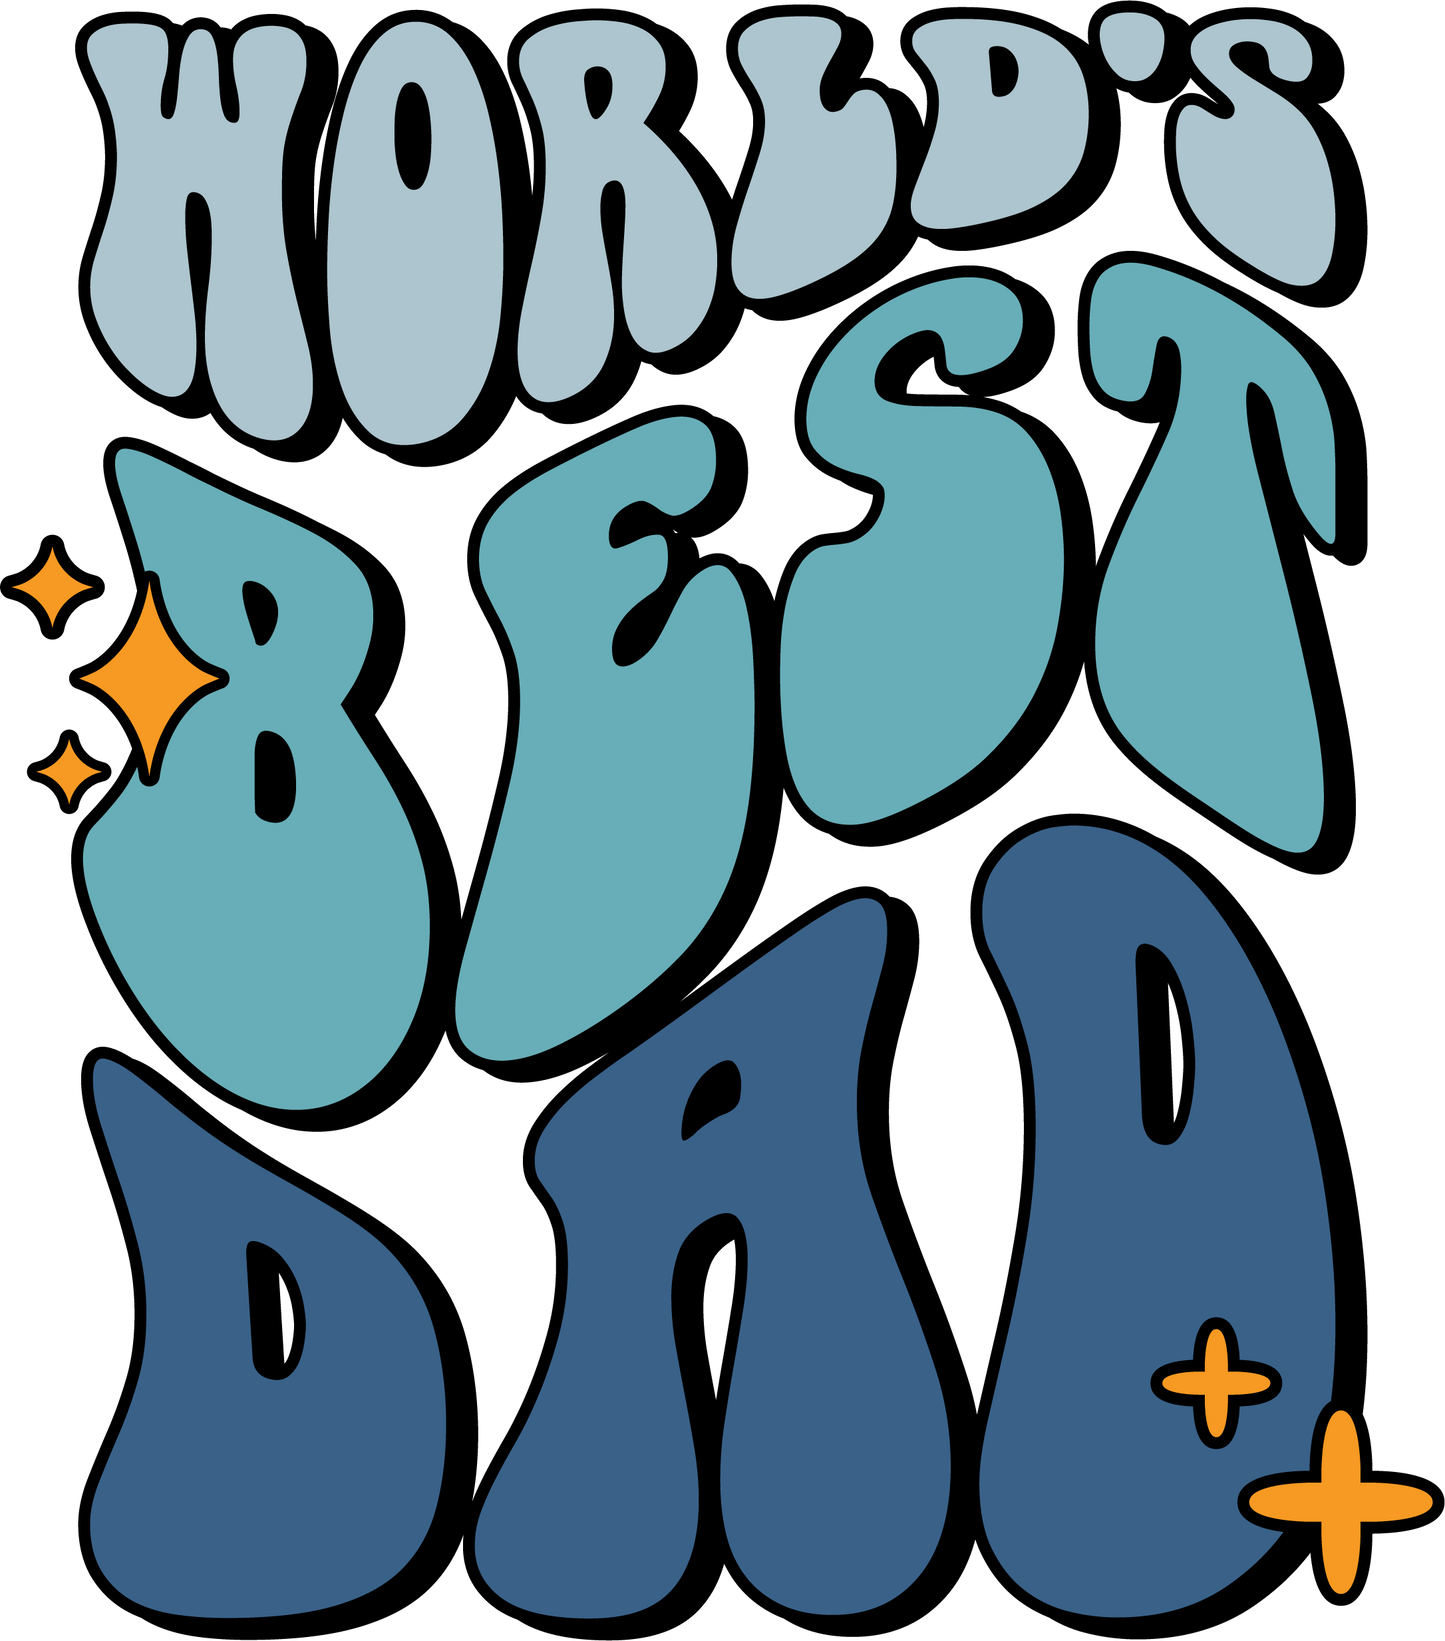 Fathers Day Worlds Best Dad - UVDTF Decal